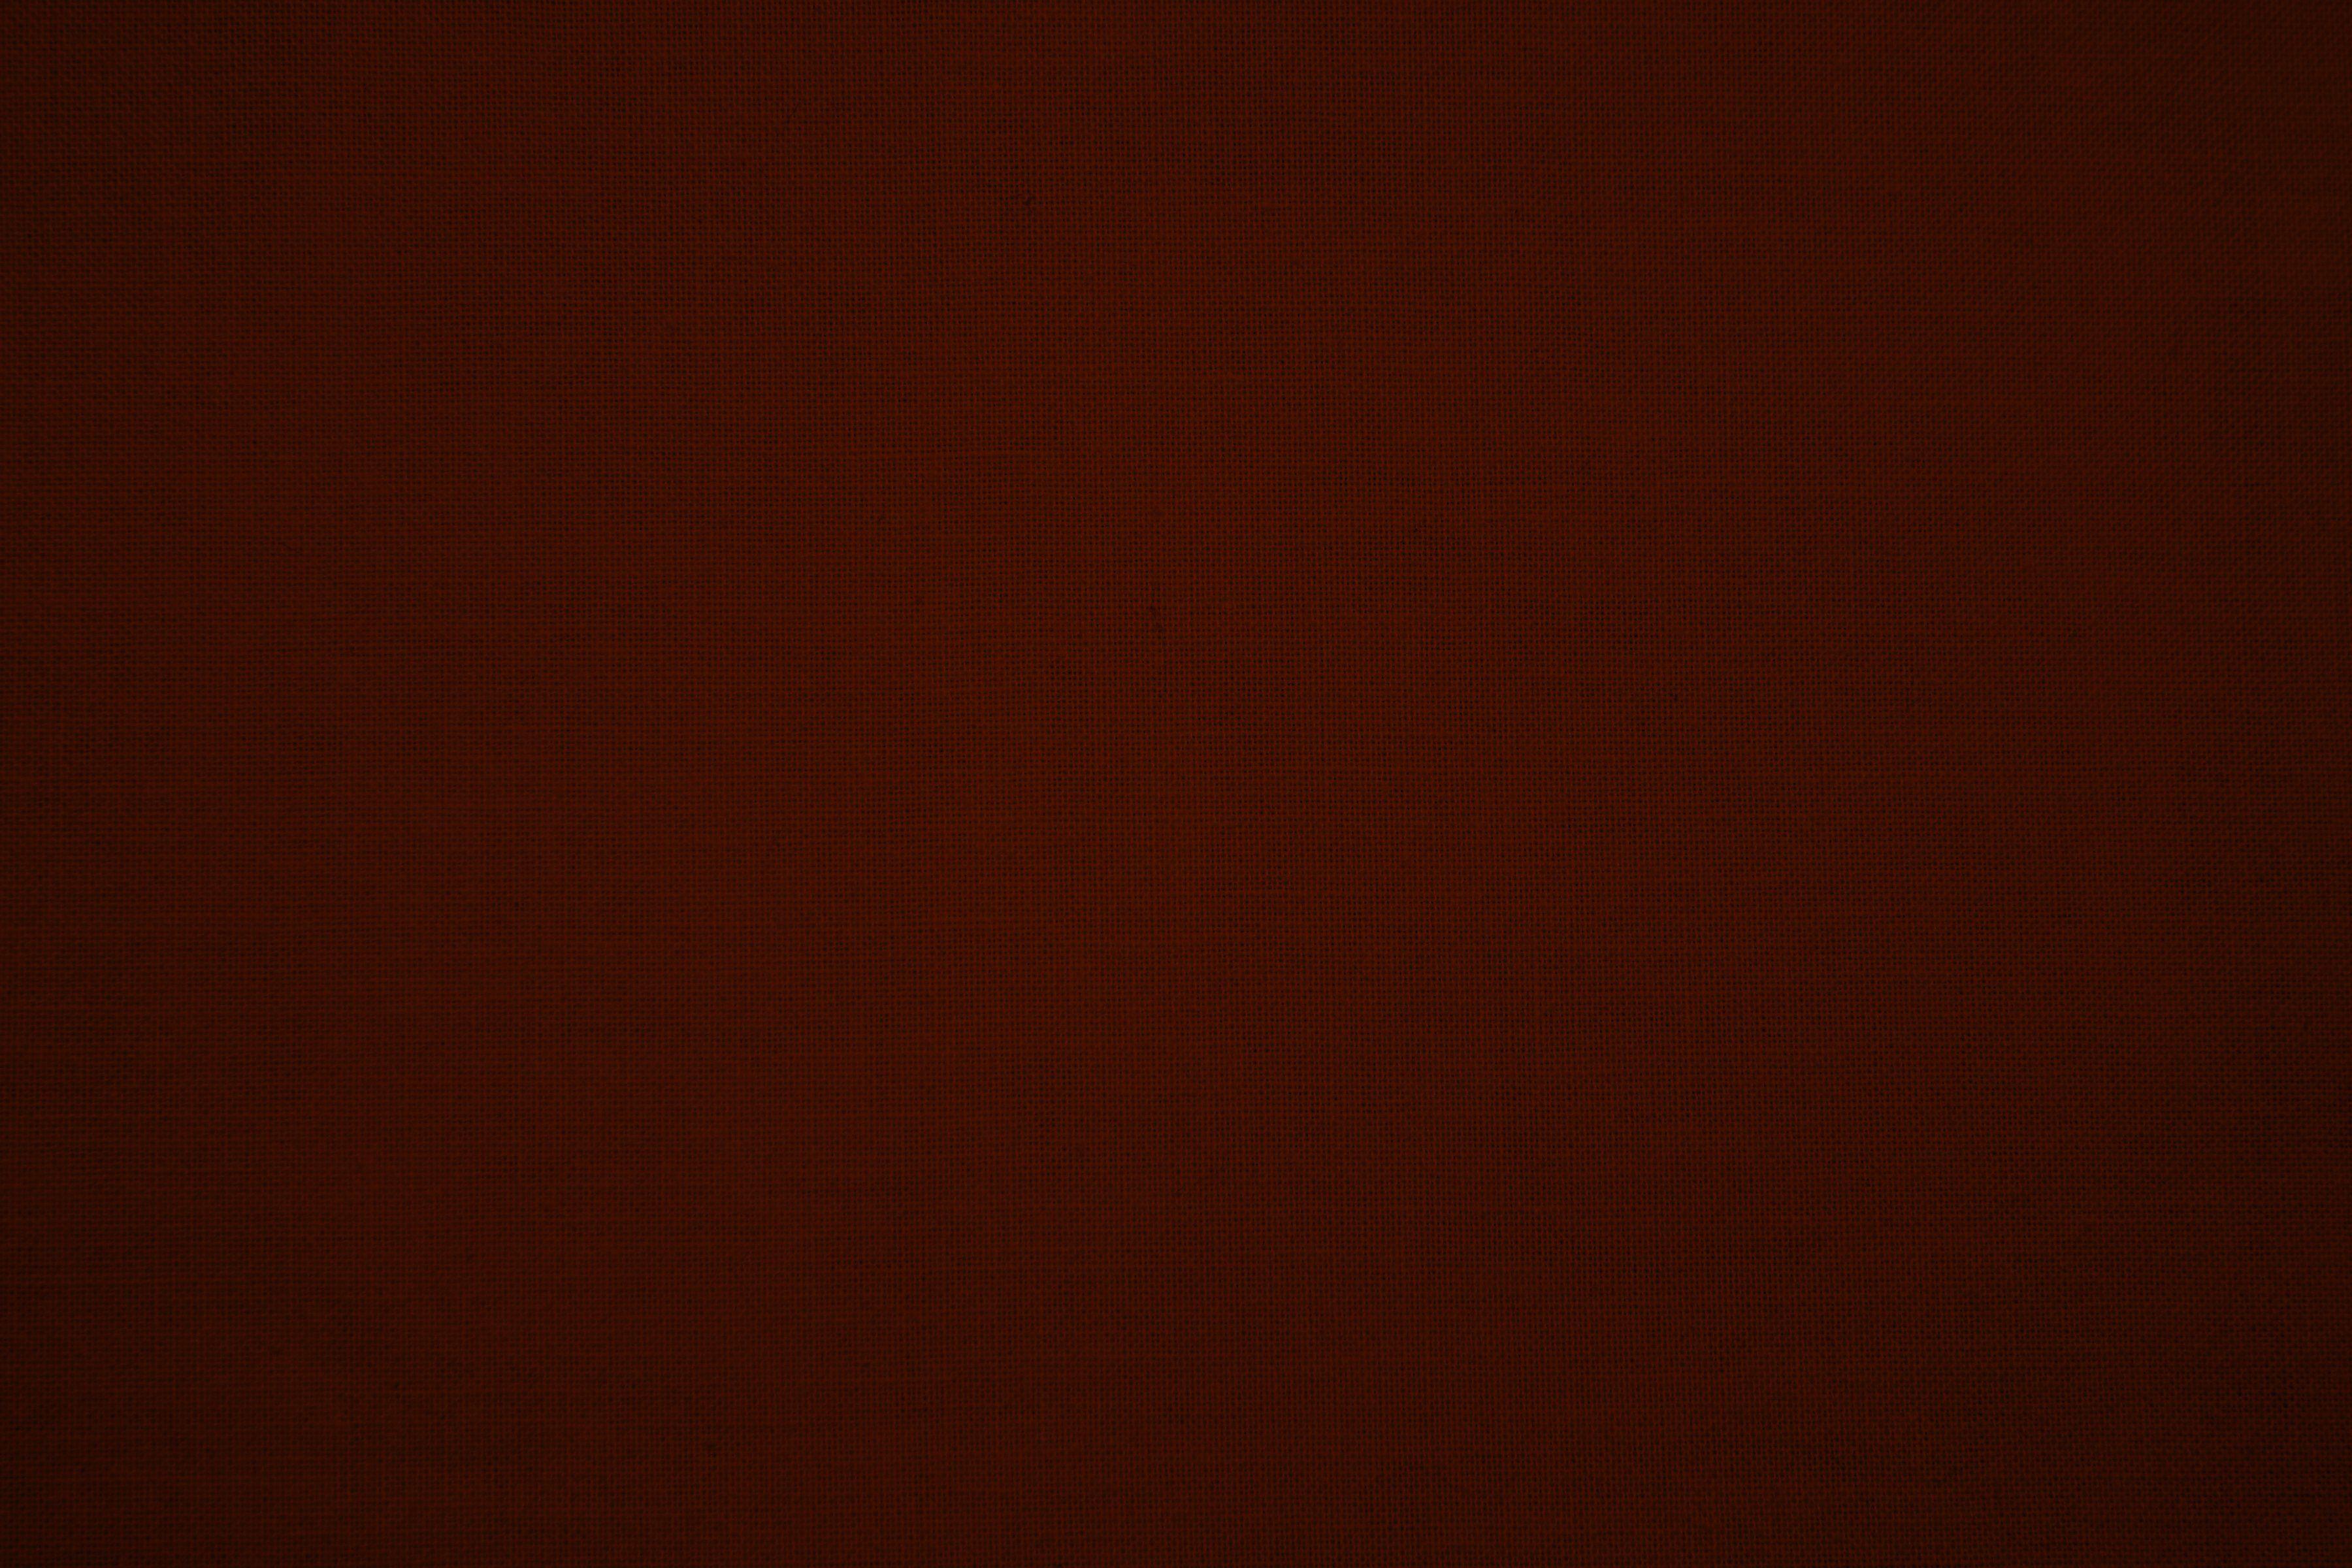 Dark Red Canvas Fabric Texture Picture. Free Photograph. Photo